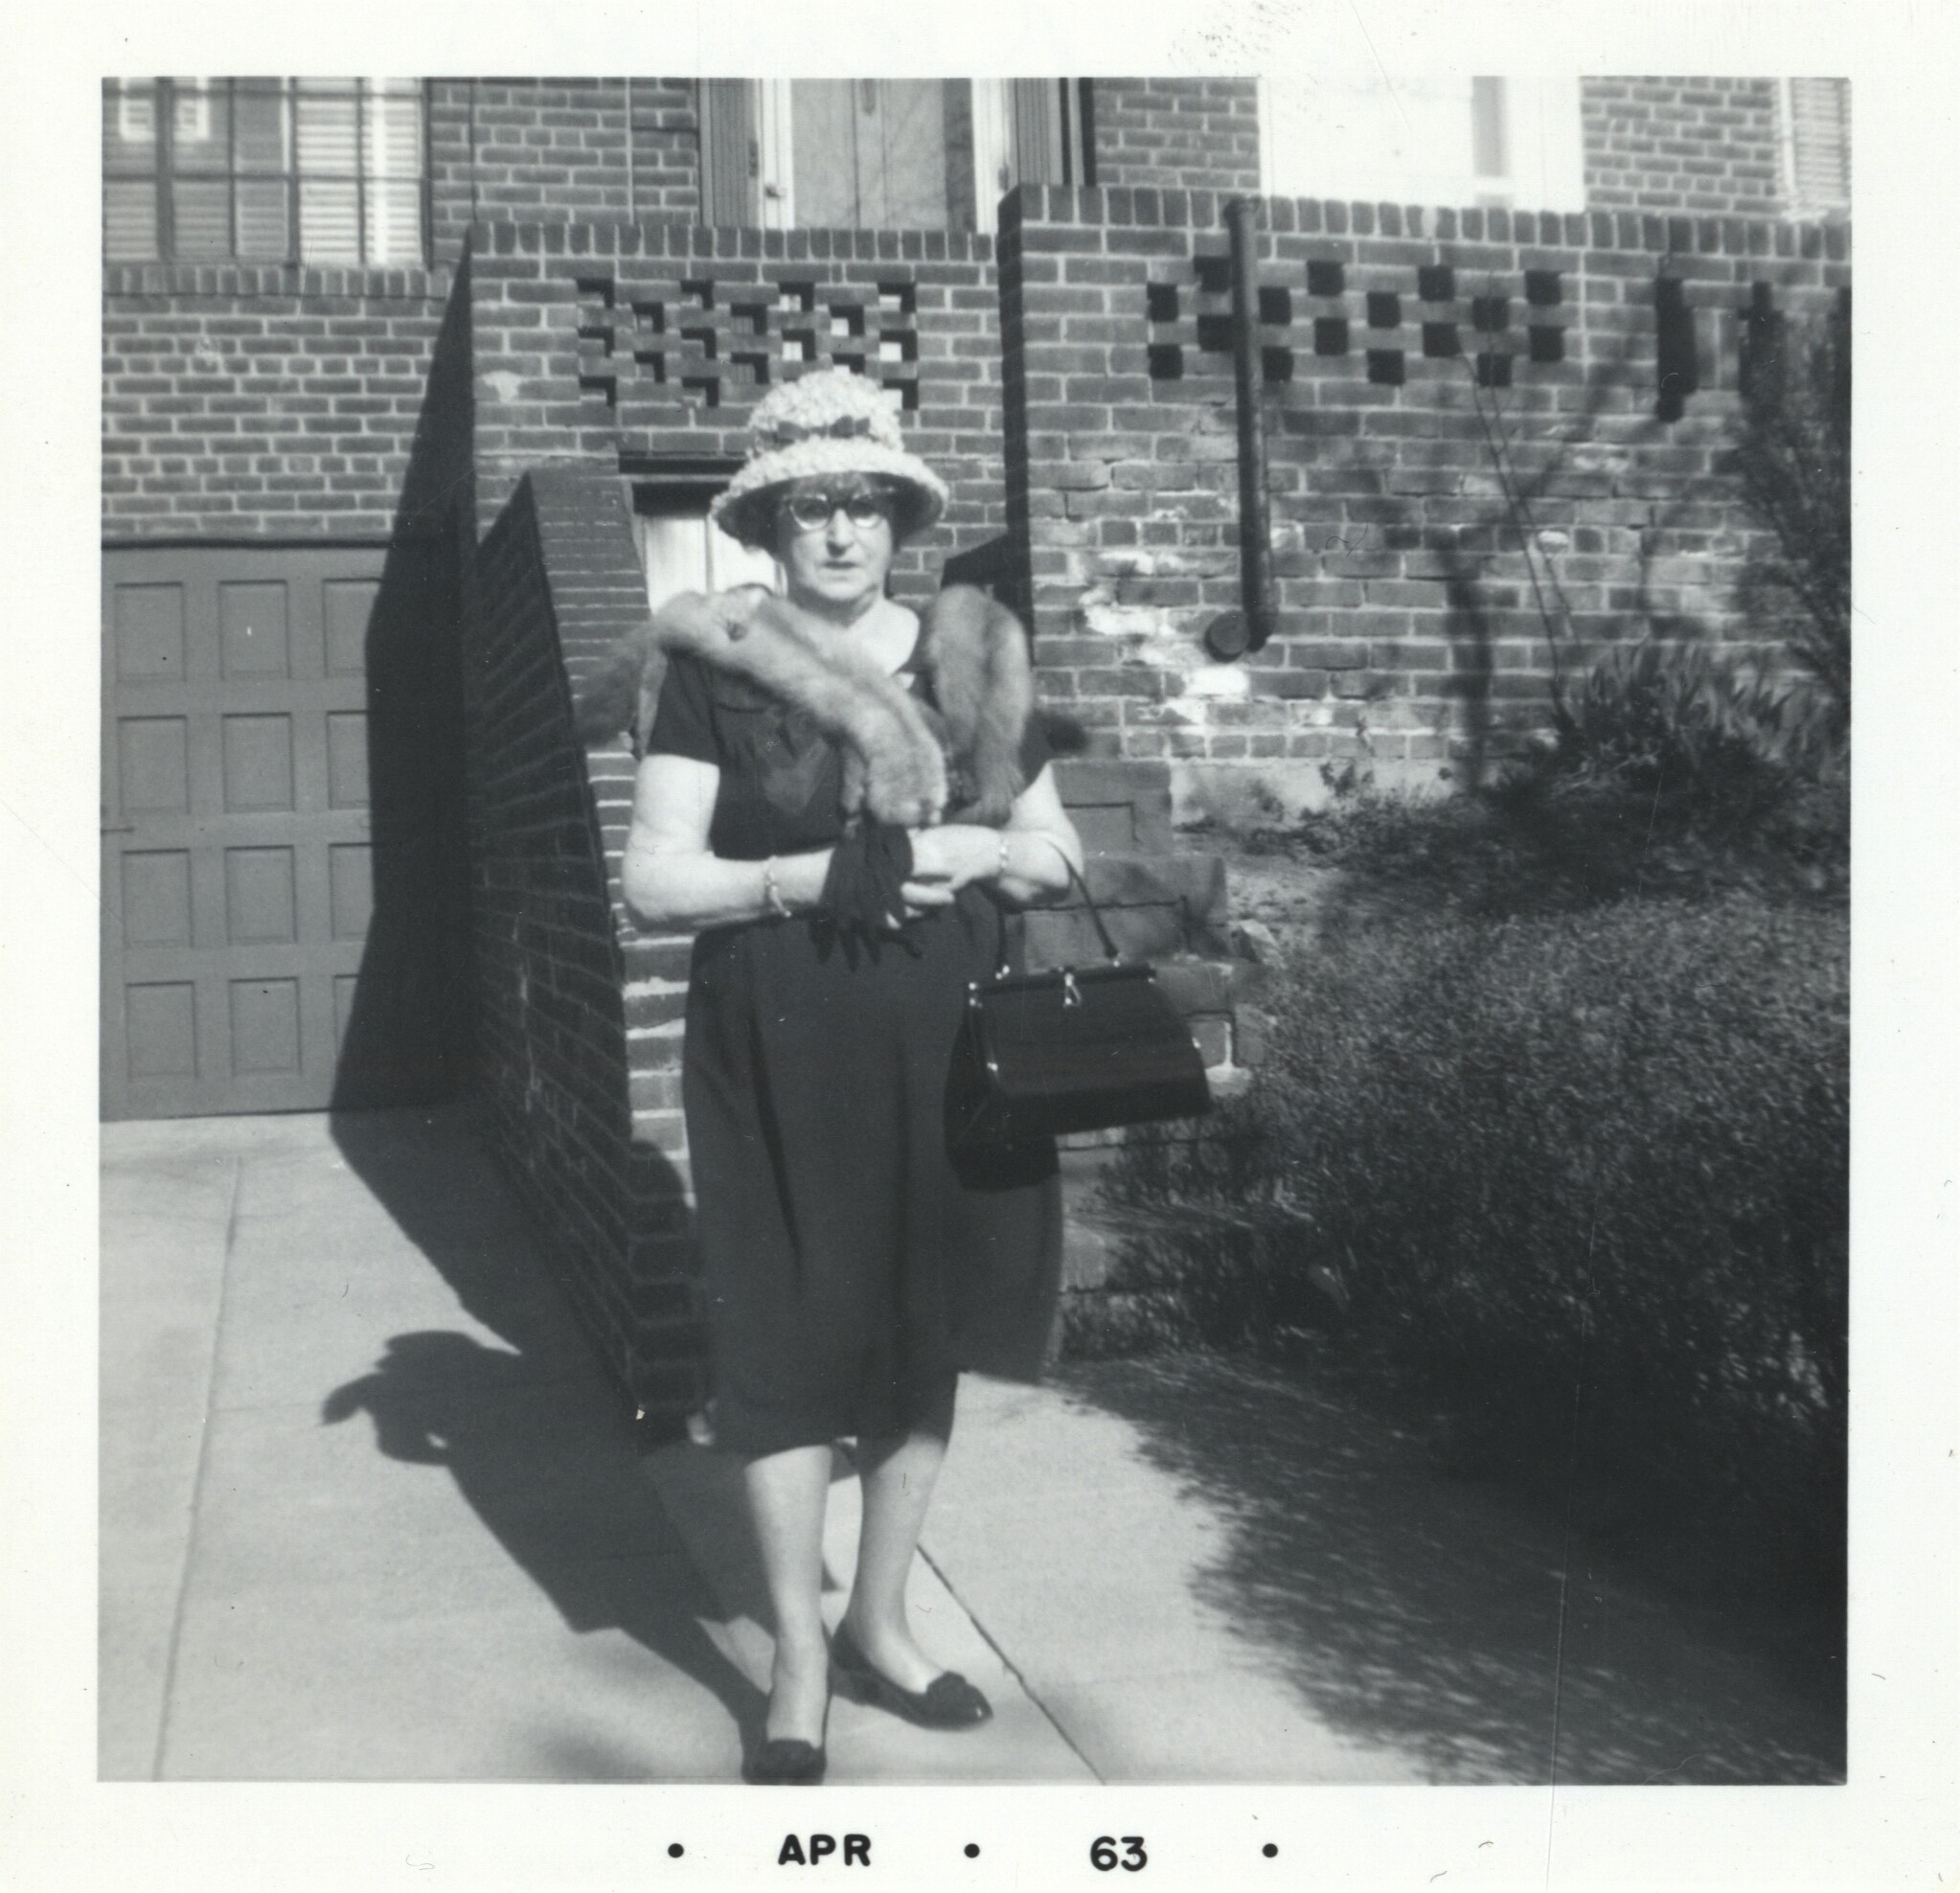 Black and white archival photograph of a woman in a dress, fur collar, hat, and glasses carrying gloves and a purse standing outside in front of a brick building.